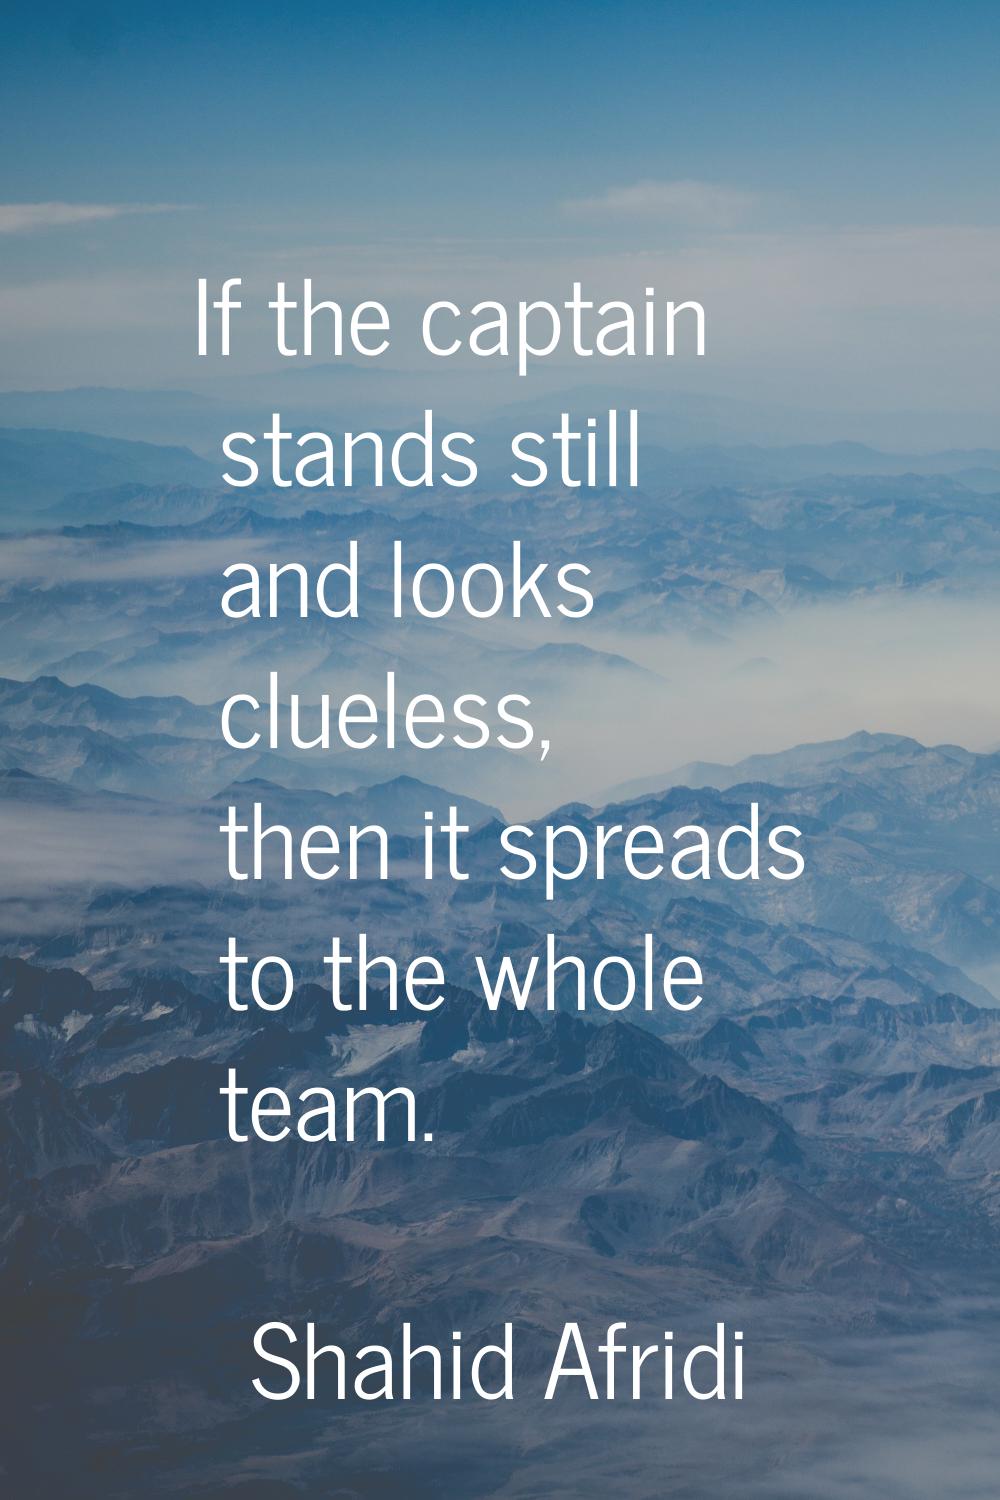 If the captain stands still and looks clueless, then it spreads to the whole team.